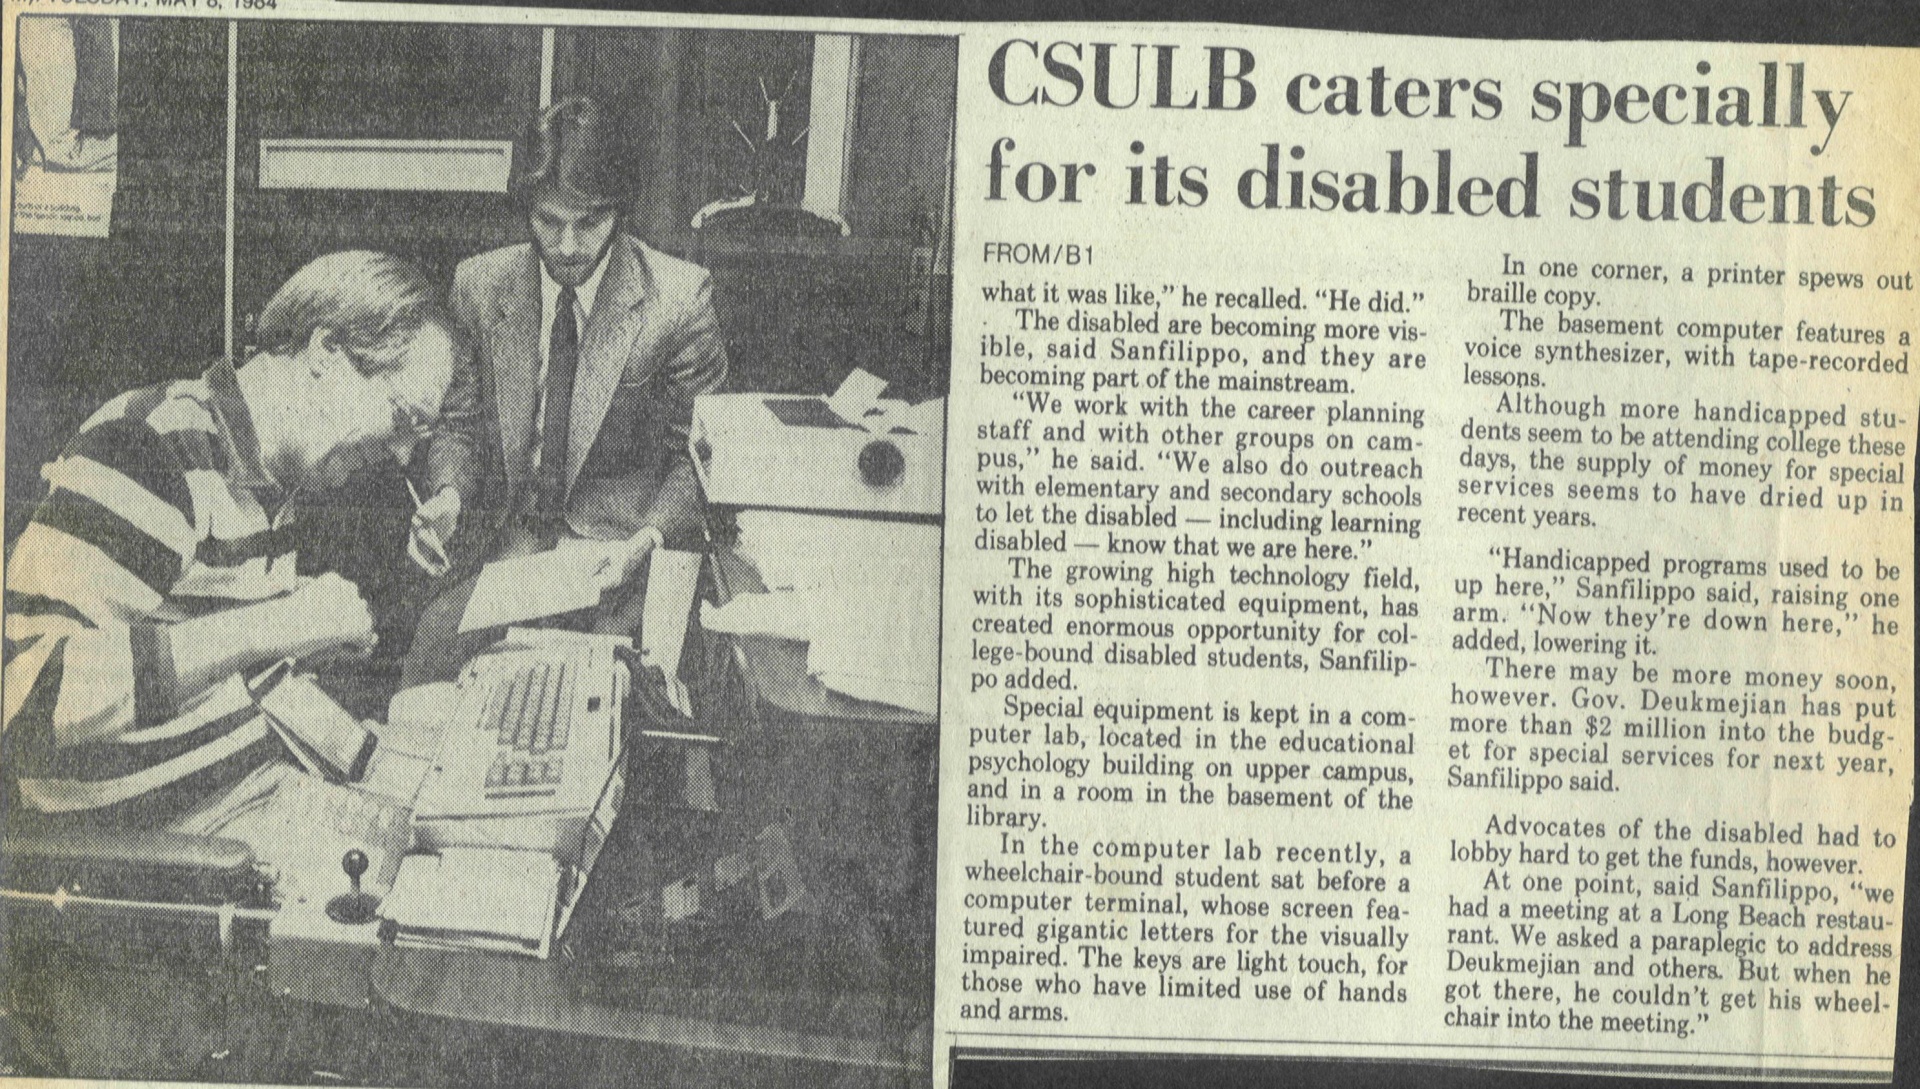 CSULB Disabled services post in the newspaper